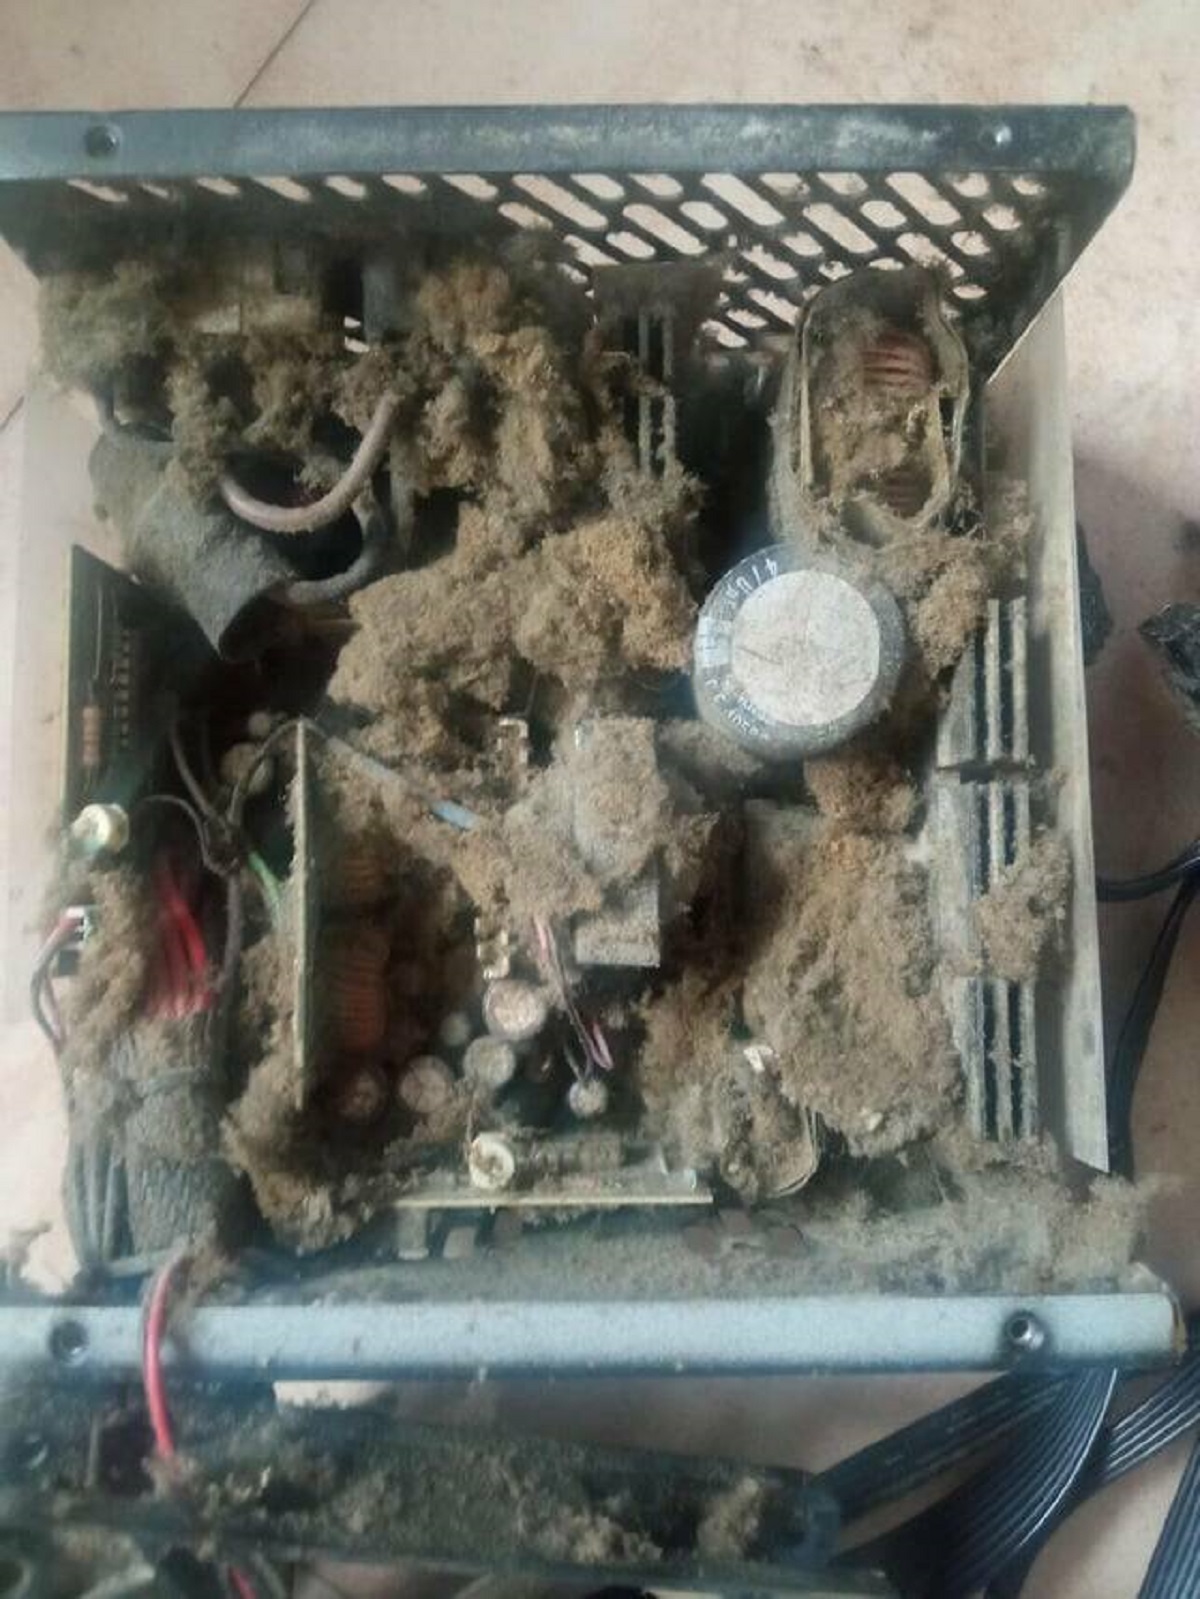 "My dusty PSU I couldn't clean for years because of breaking warranty sticker"